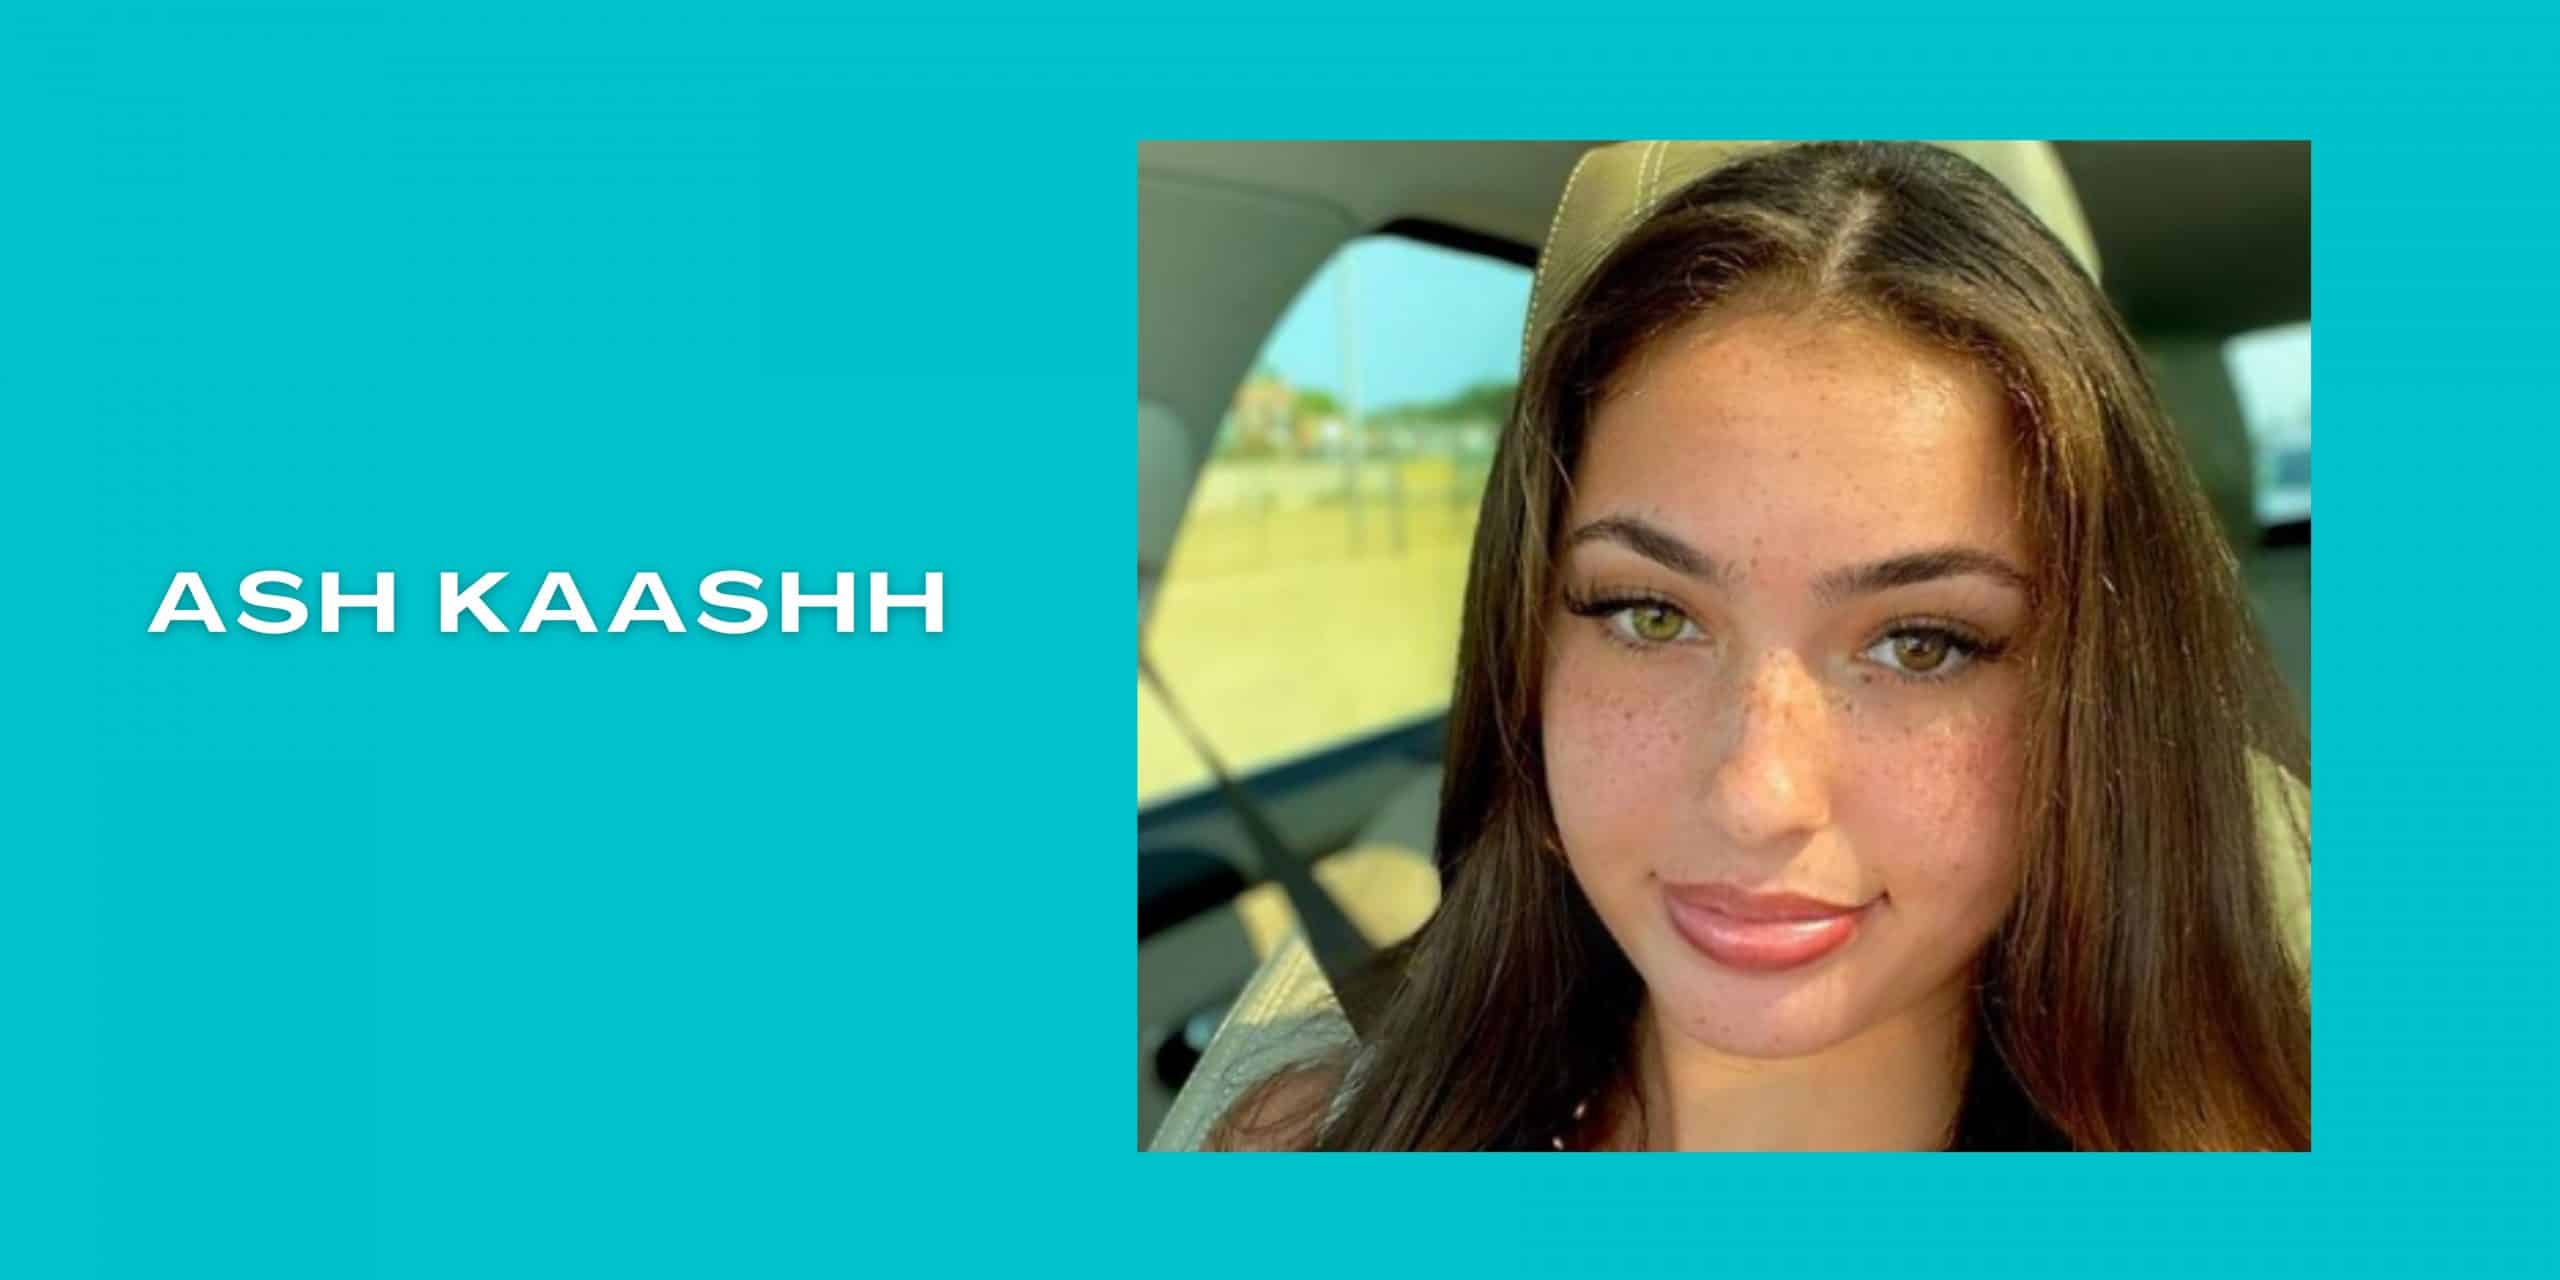 Ash Kaashh holds an American nationality as she hails from Chicago, Illinoi...